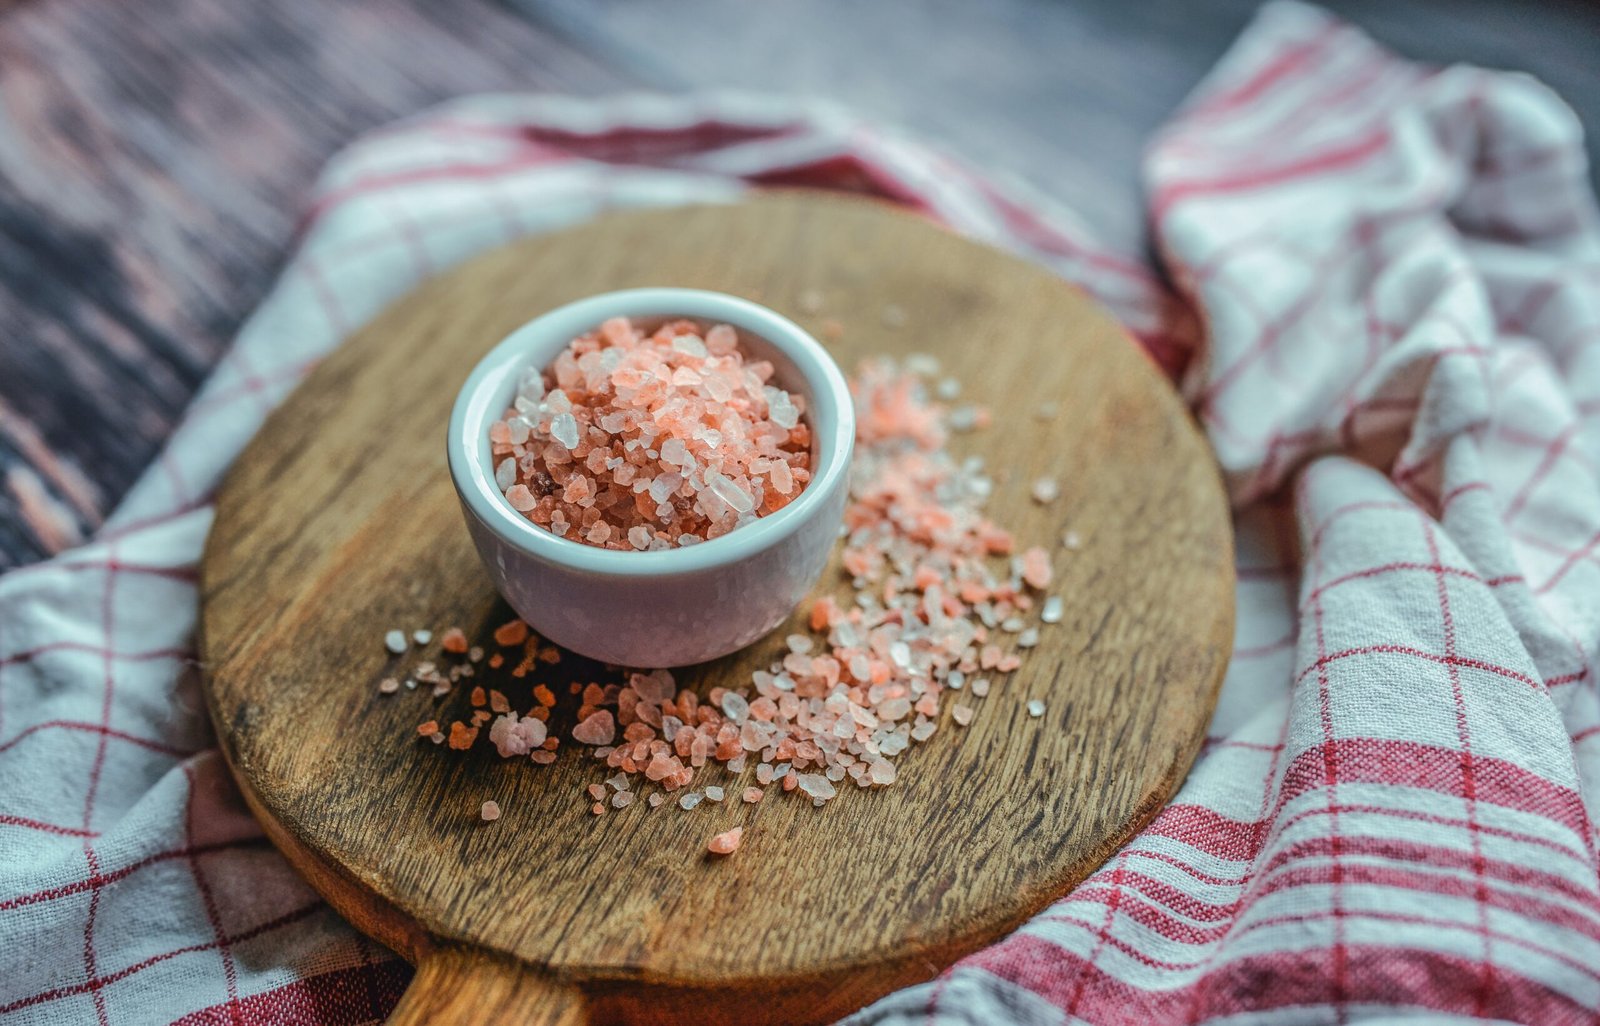 Celtic Salt vs Himalayan Salt: Which One Reigns Supreme in Benefits?